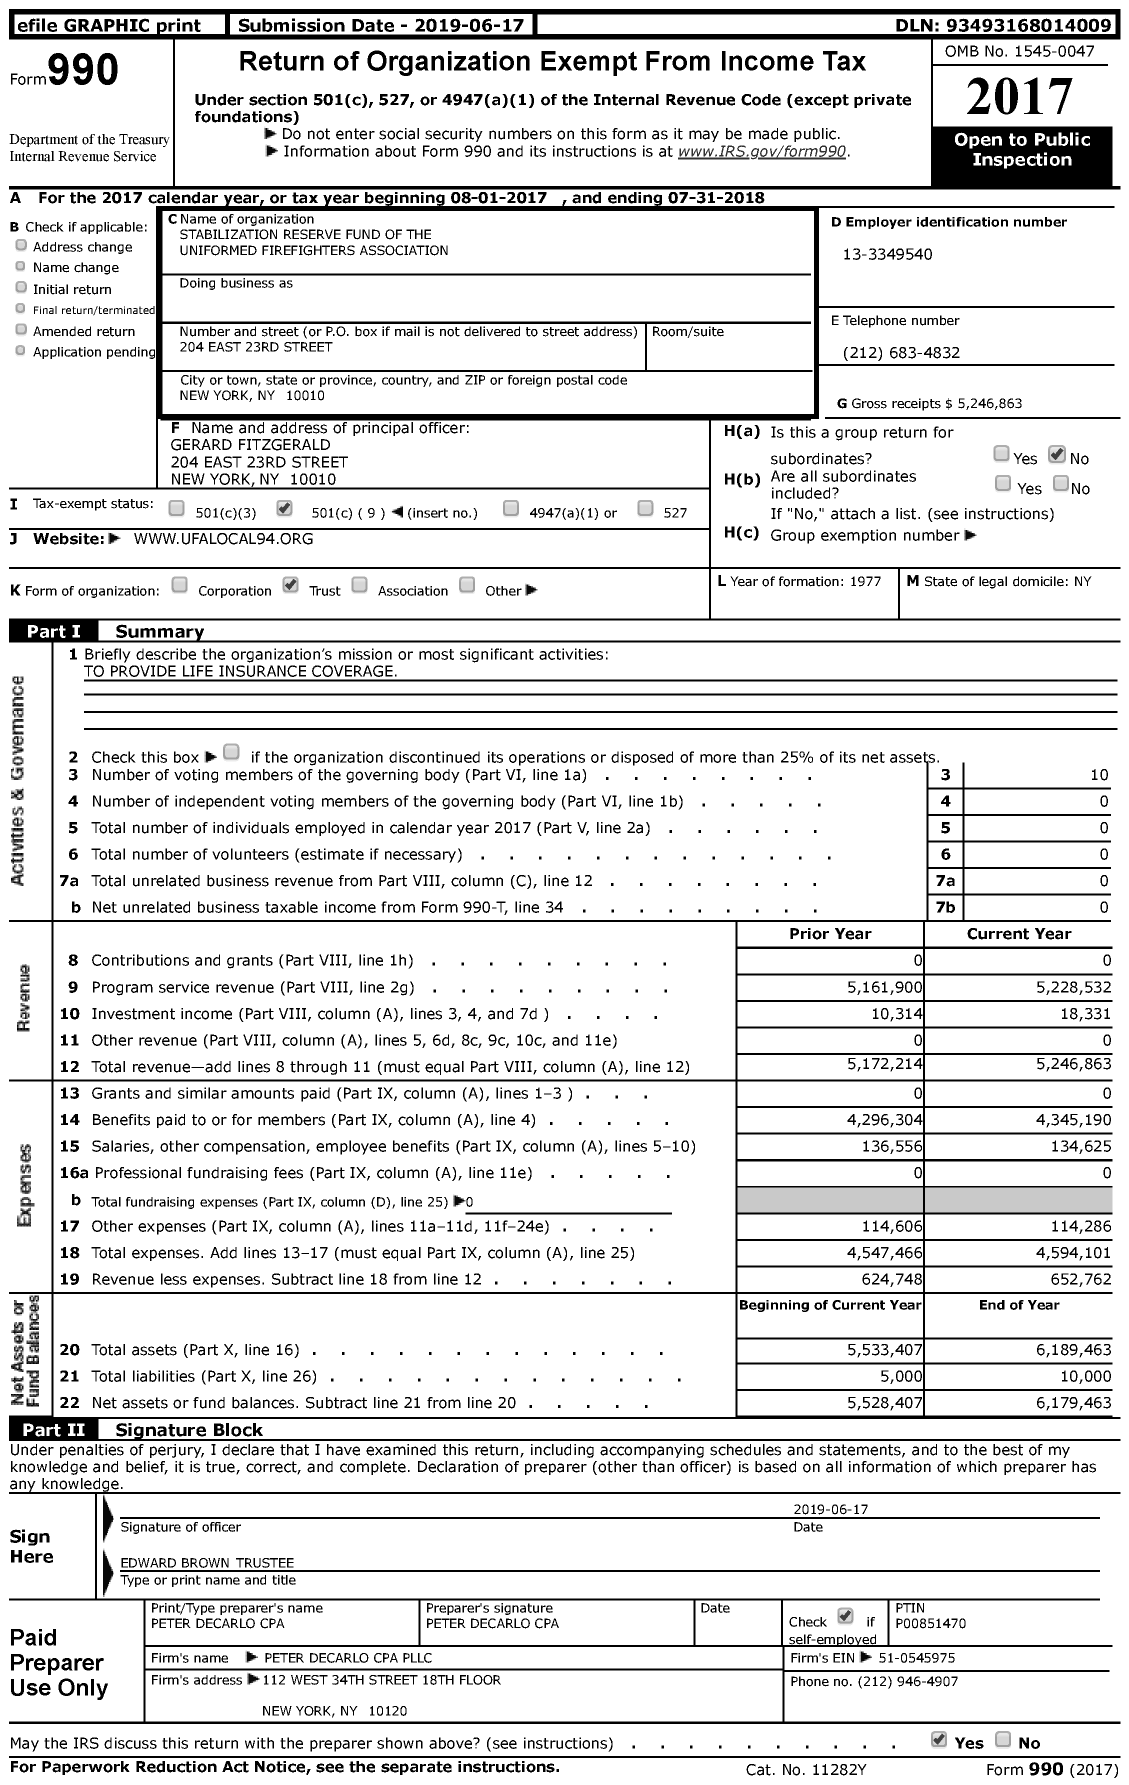 Image of first page of 2017 Form 990 for Stabilization Reserve Fund of the Uniformed Firefighters Association